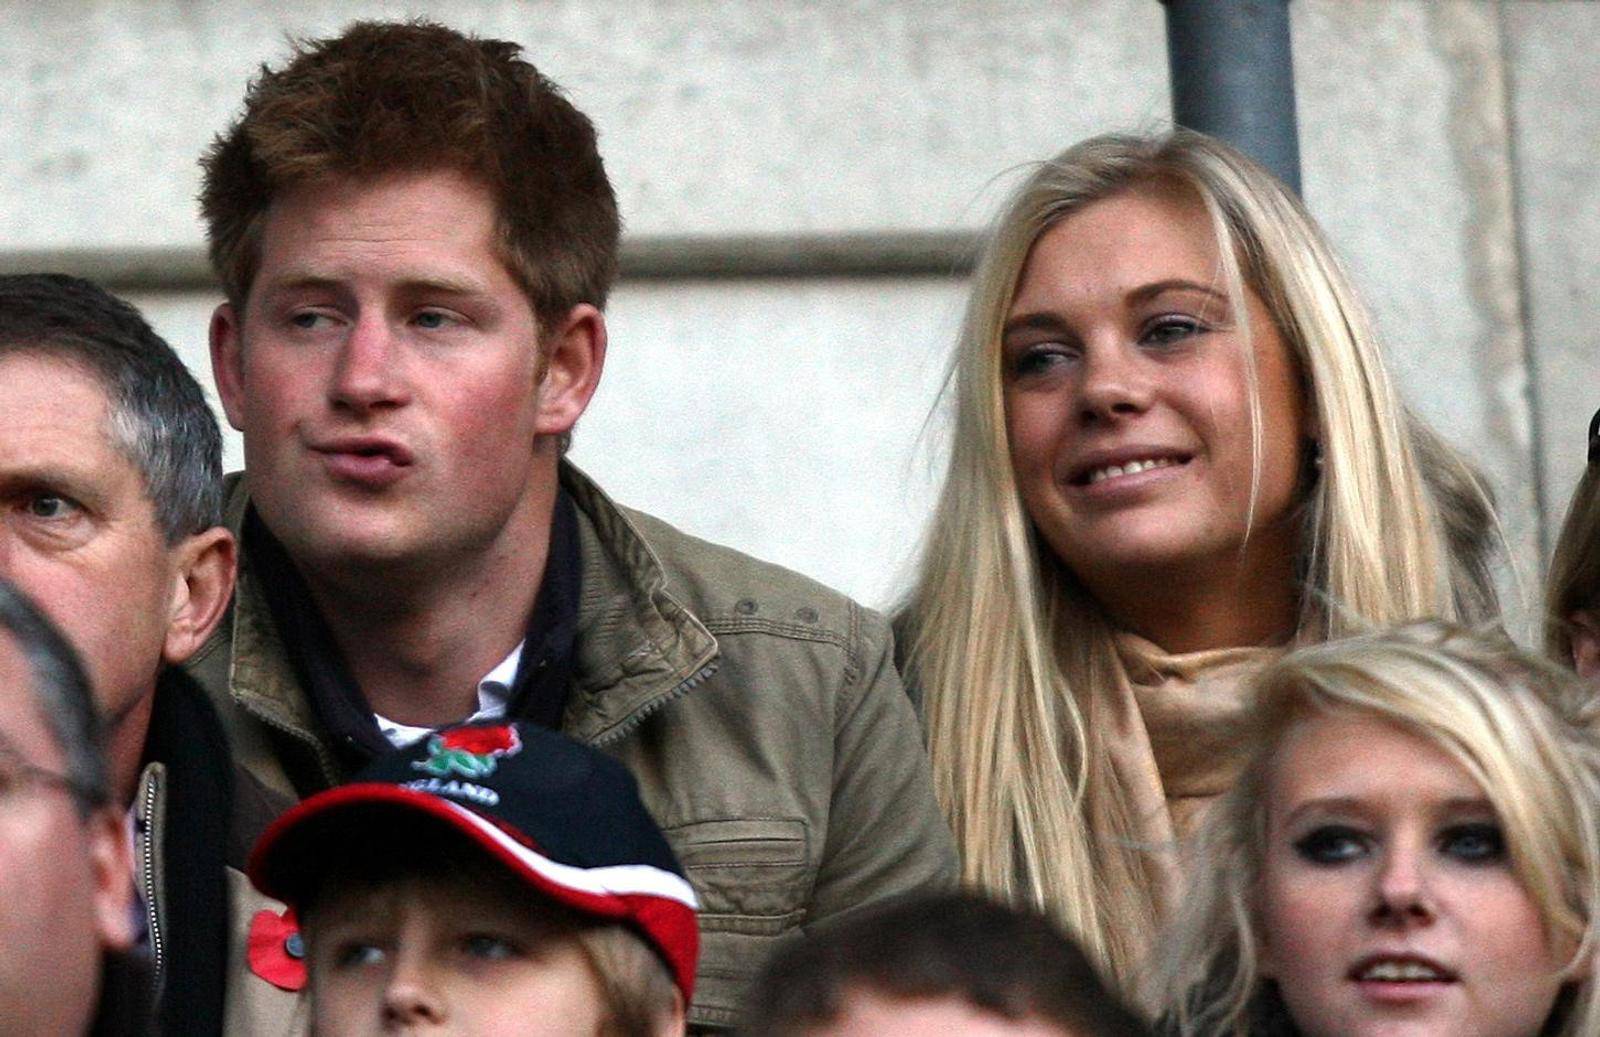 Prince Harry engagement